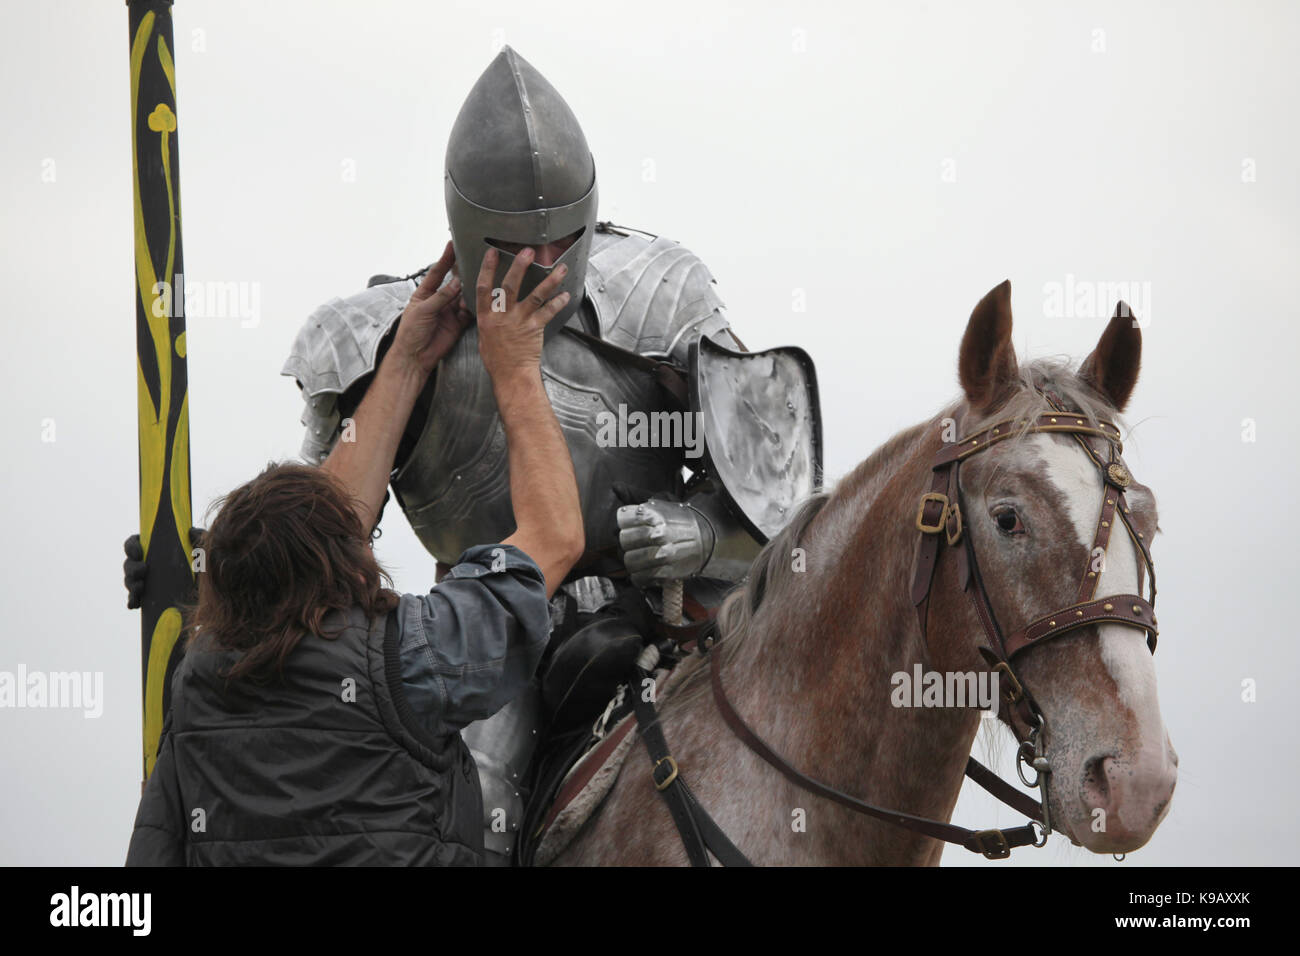 Staff member fixes medieval armour on Czech actor Michal Bednář dressed as a medieval knight during the filming of the new German film 'Die Ritter' ('The Knights') directed by Carsten Gutschmidt by order of ZDF in Milovice in Central Bohemia, Czech Republic in 23 October 2013. Stock Photo